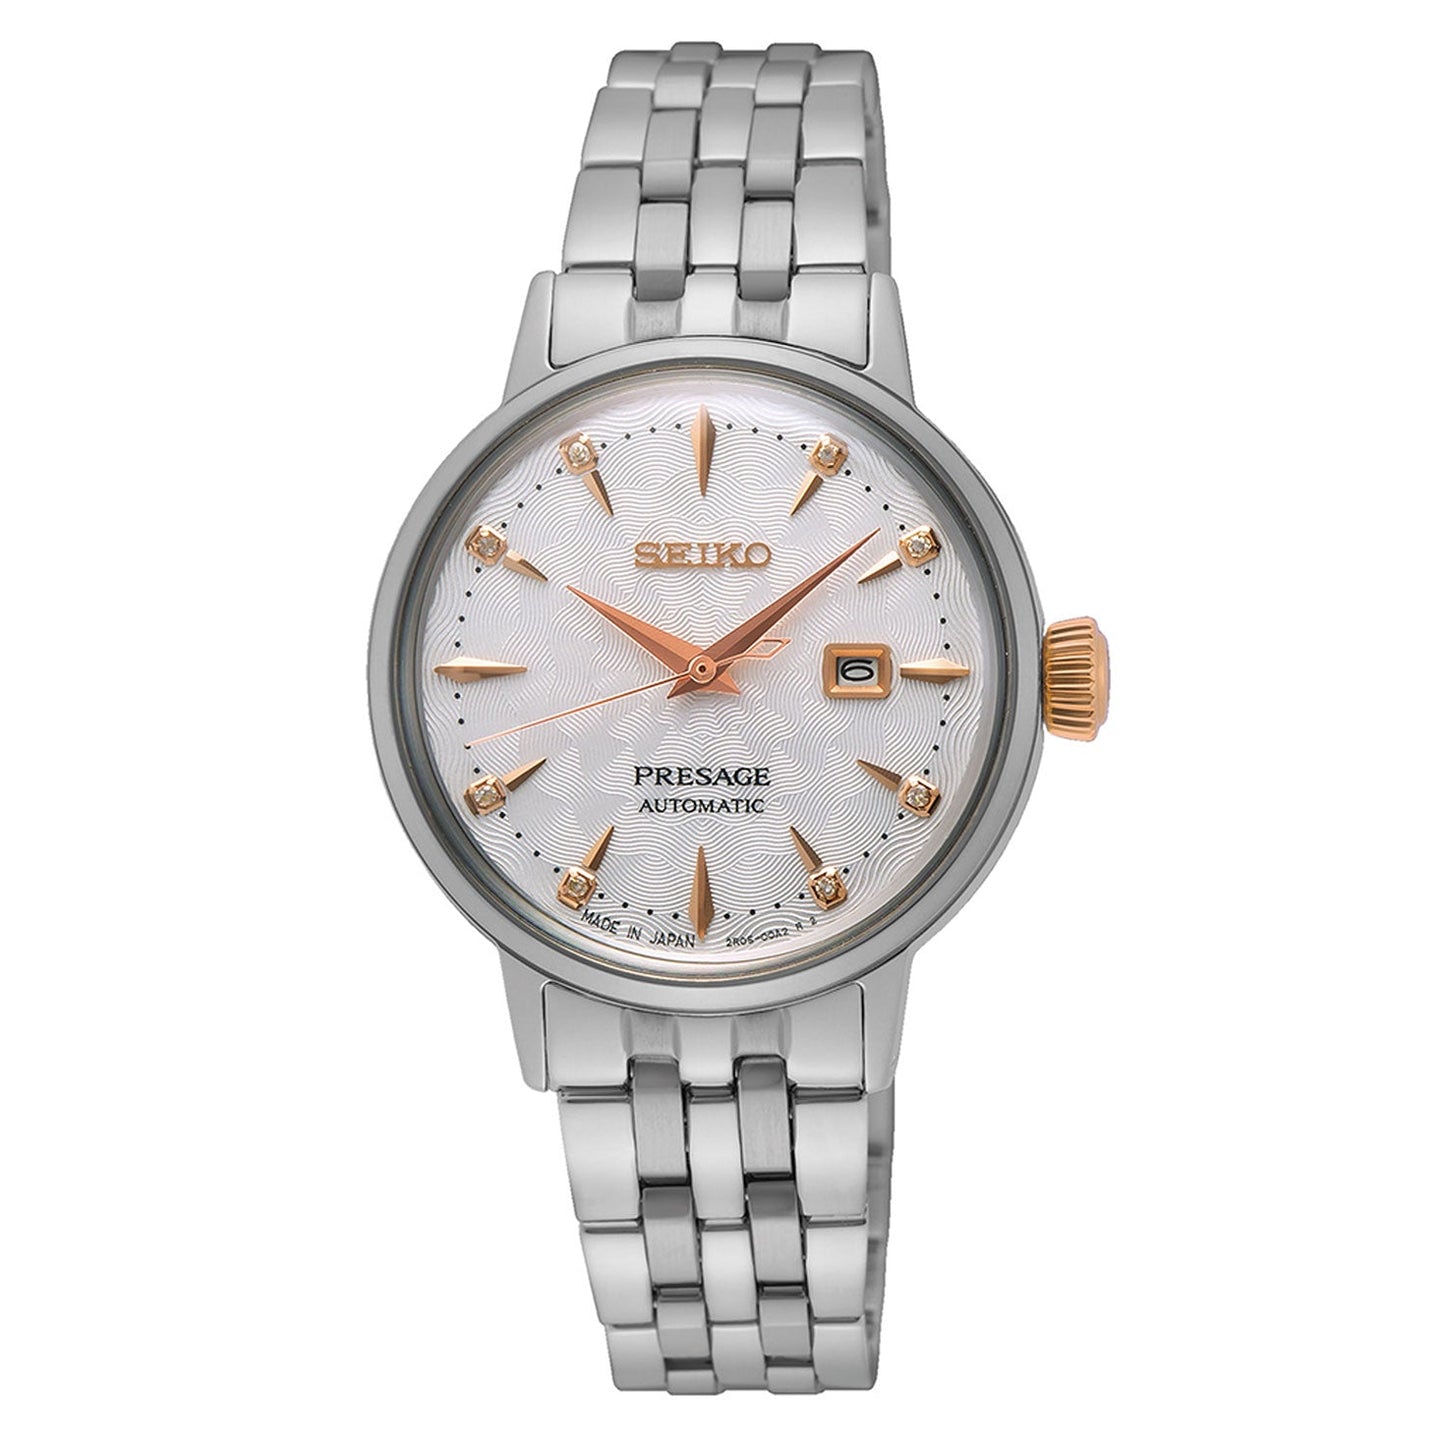 Seiko Presage Cocktail Time Automatic With Manual Winding 40.5mm Watch